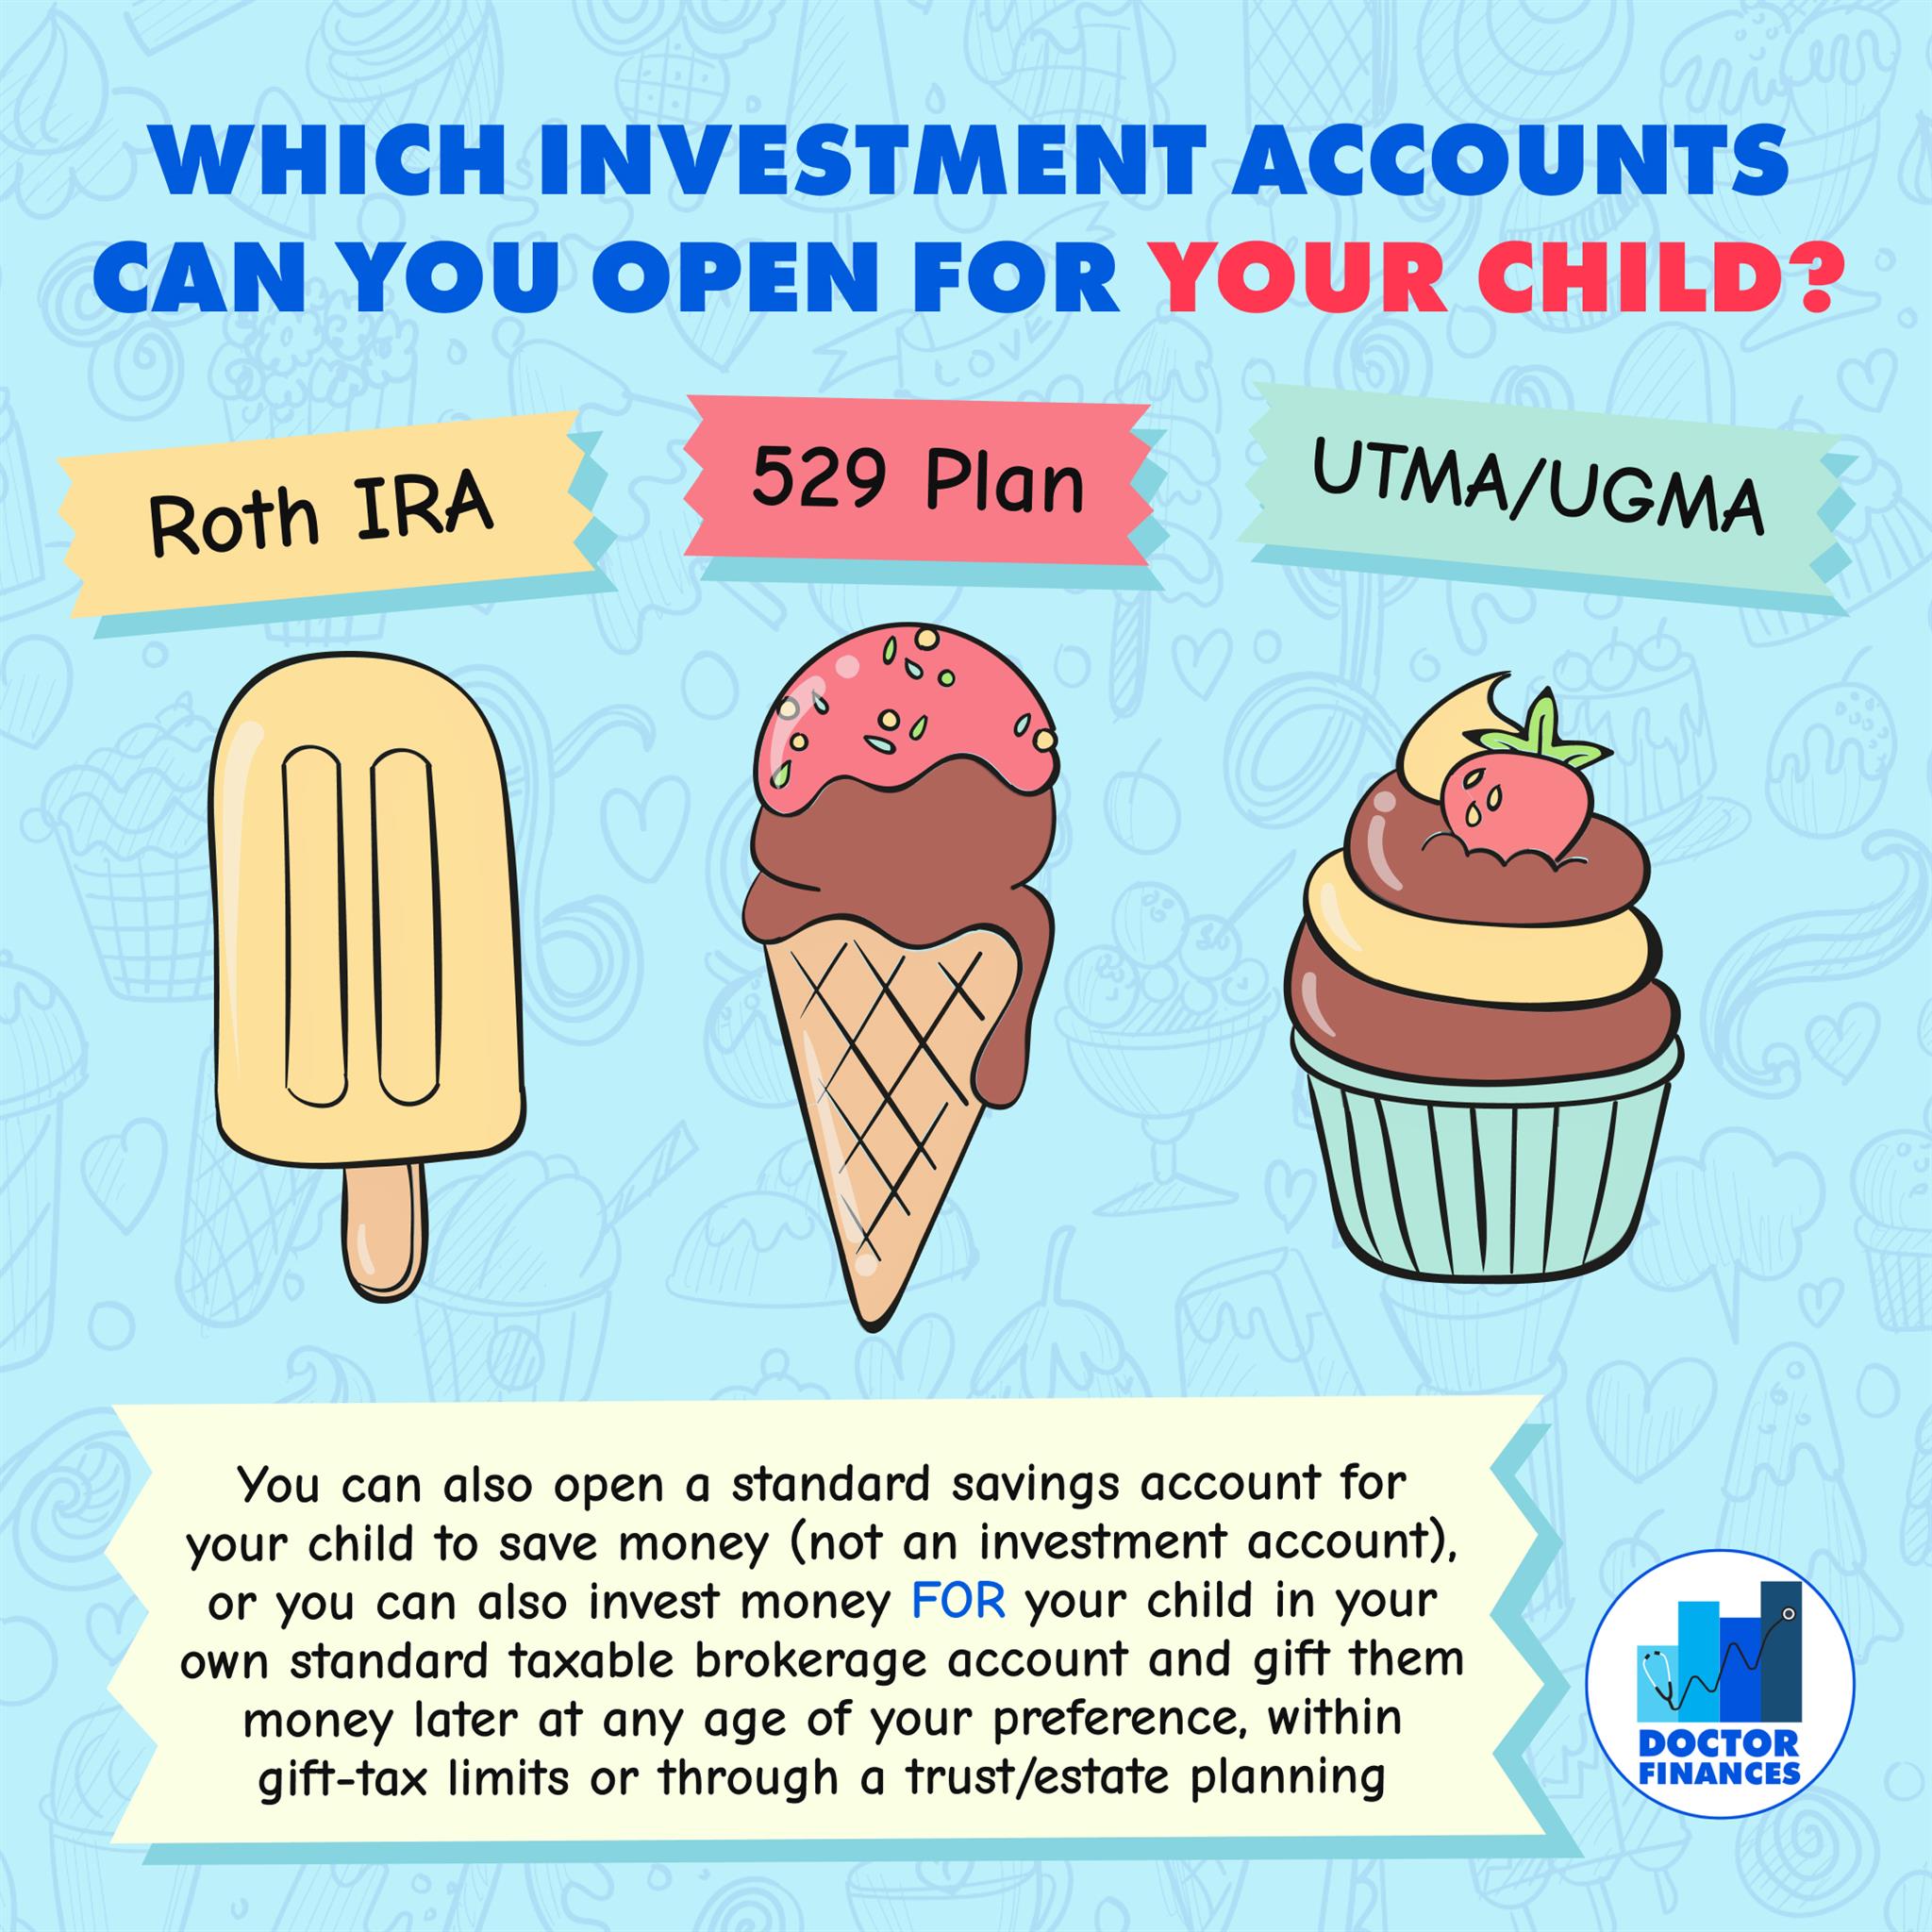 Which Investment Accounts Can You Open For Your Child?